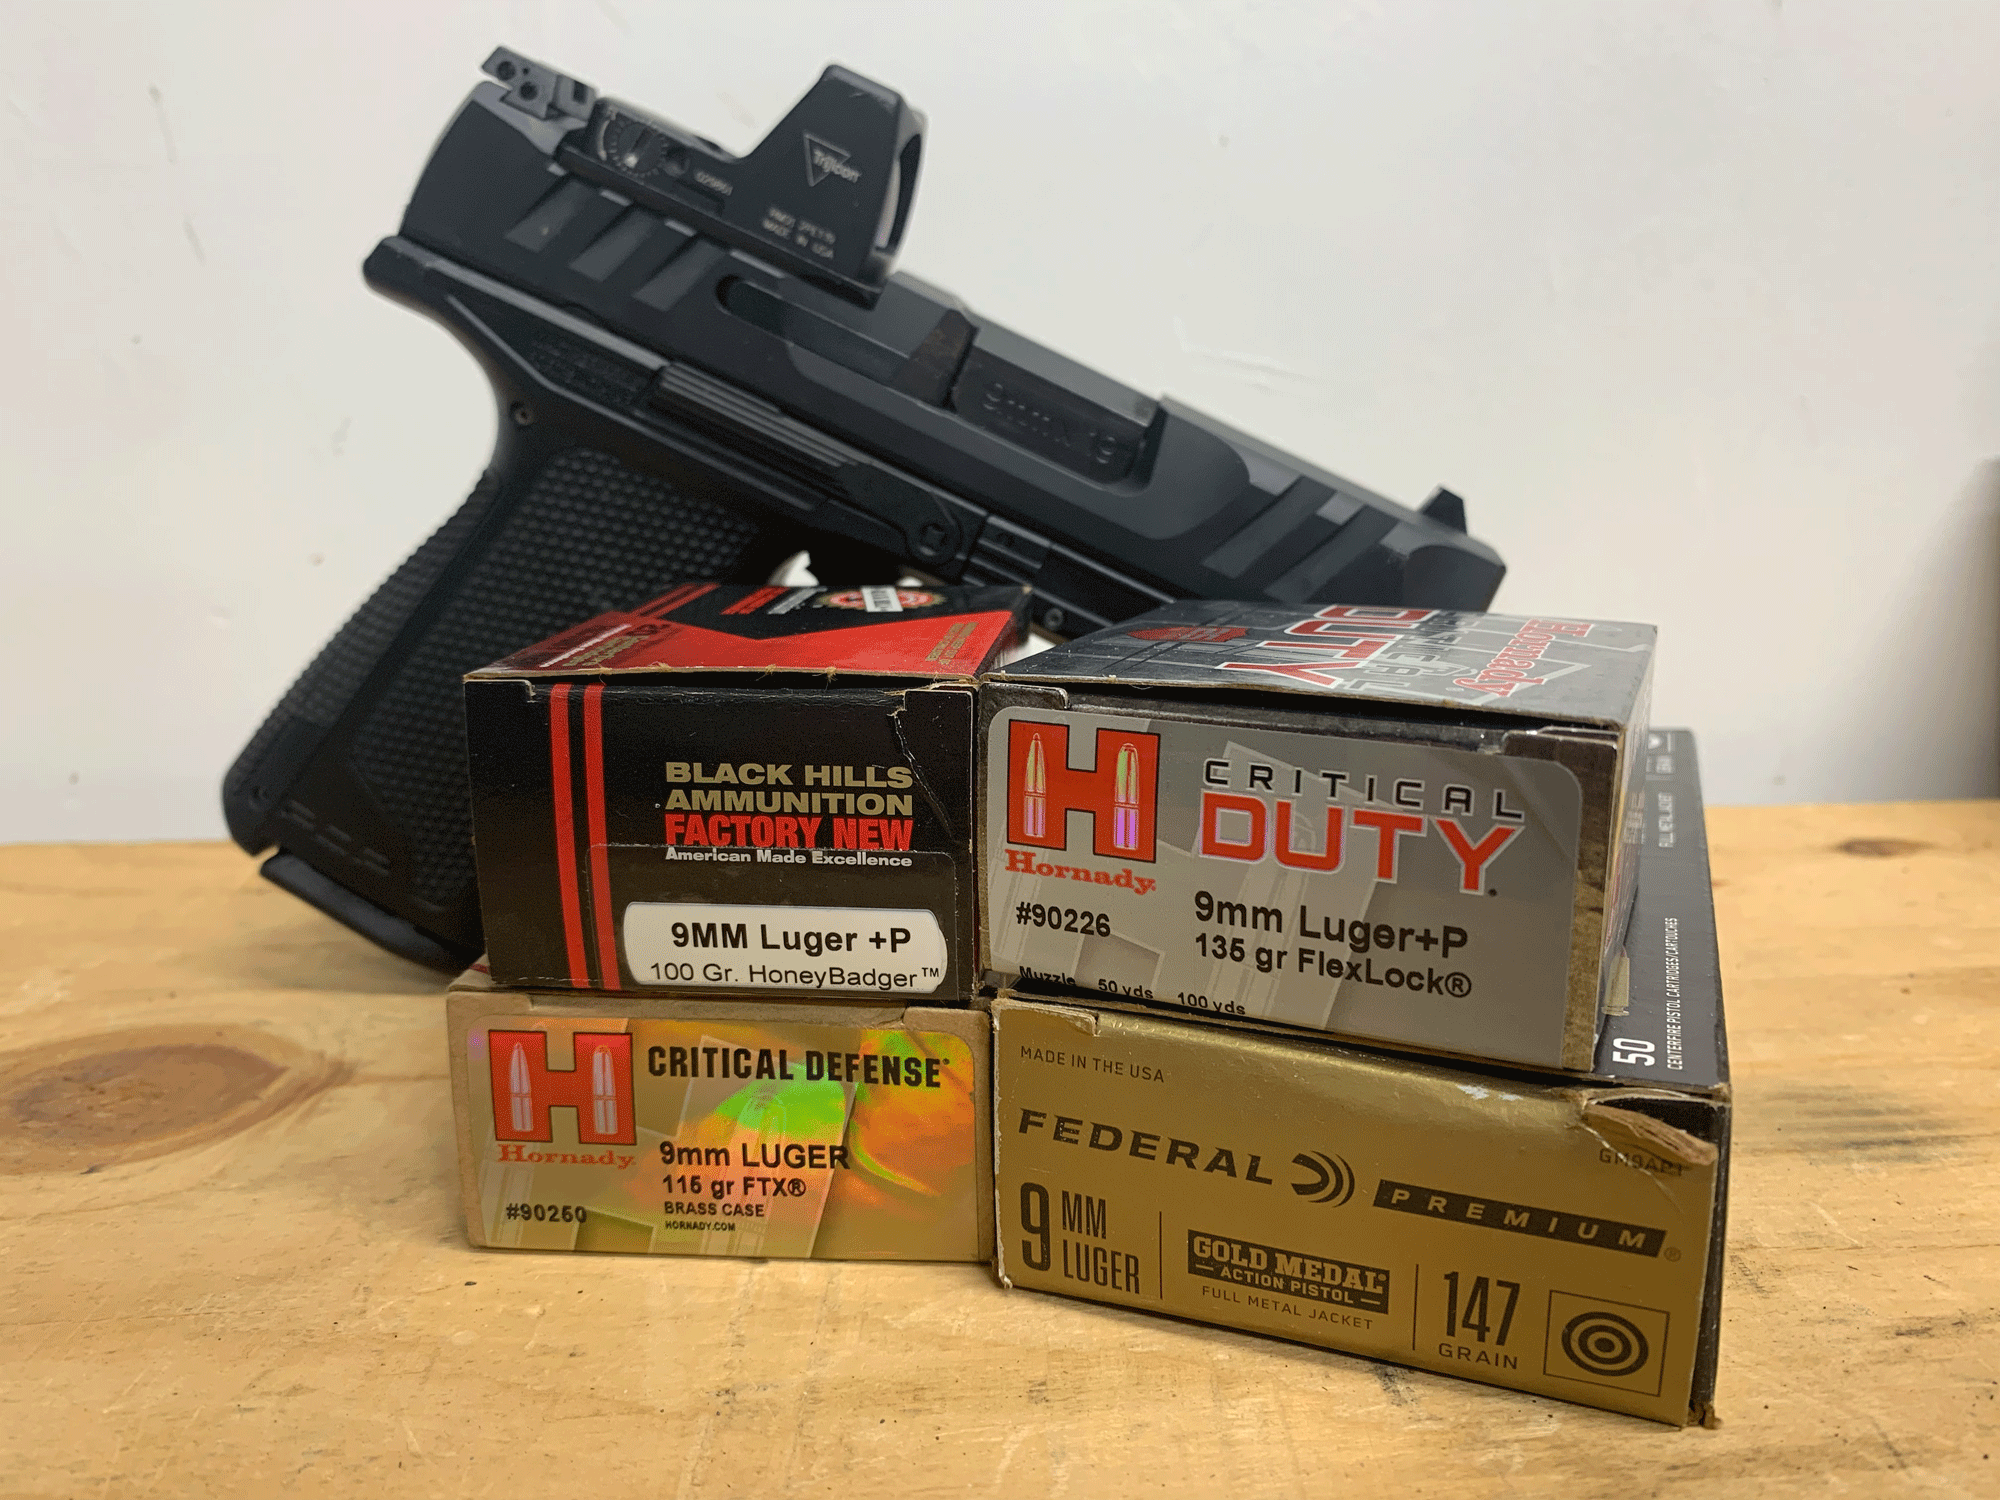 Walther PDP-F and ammo